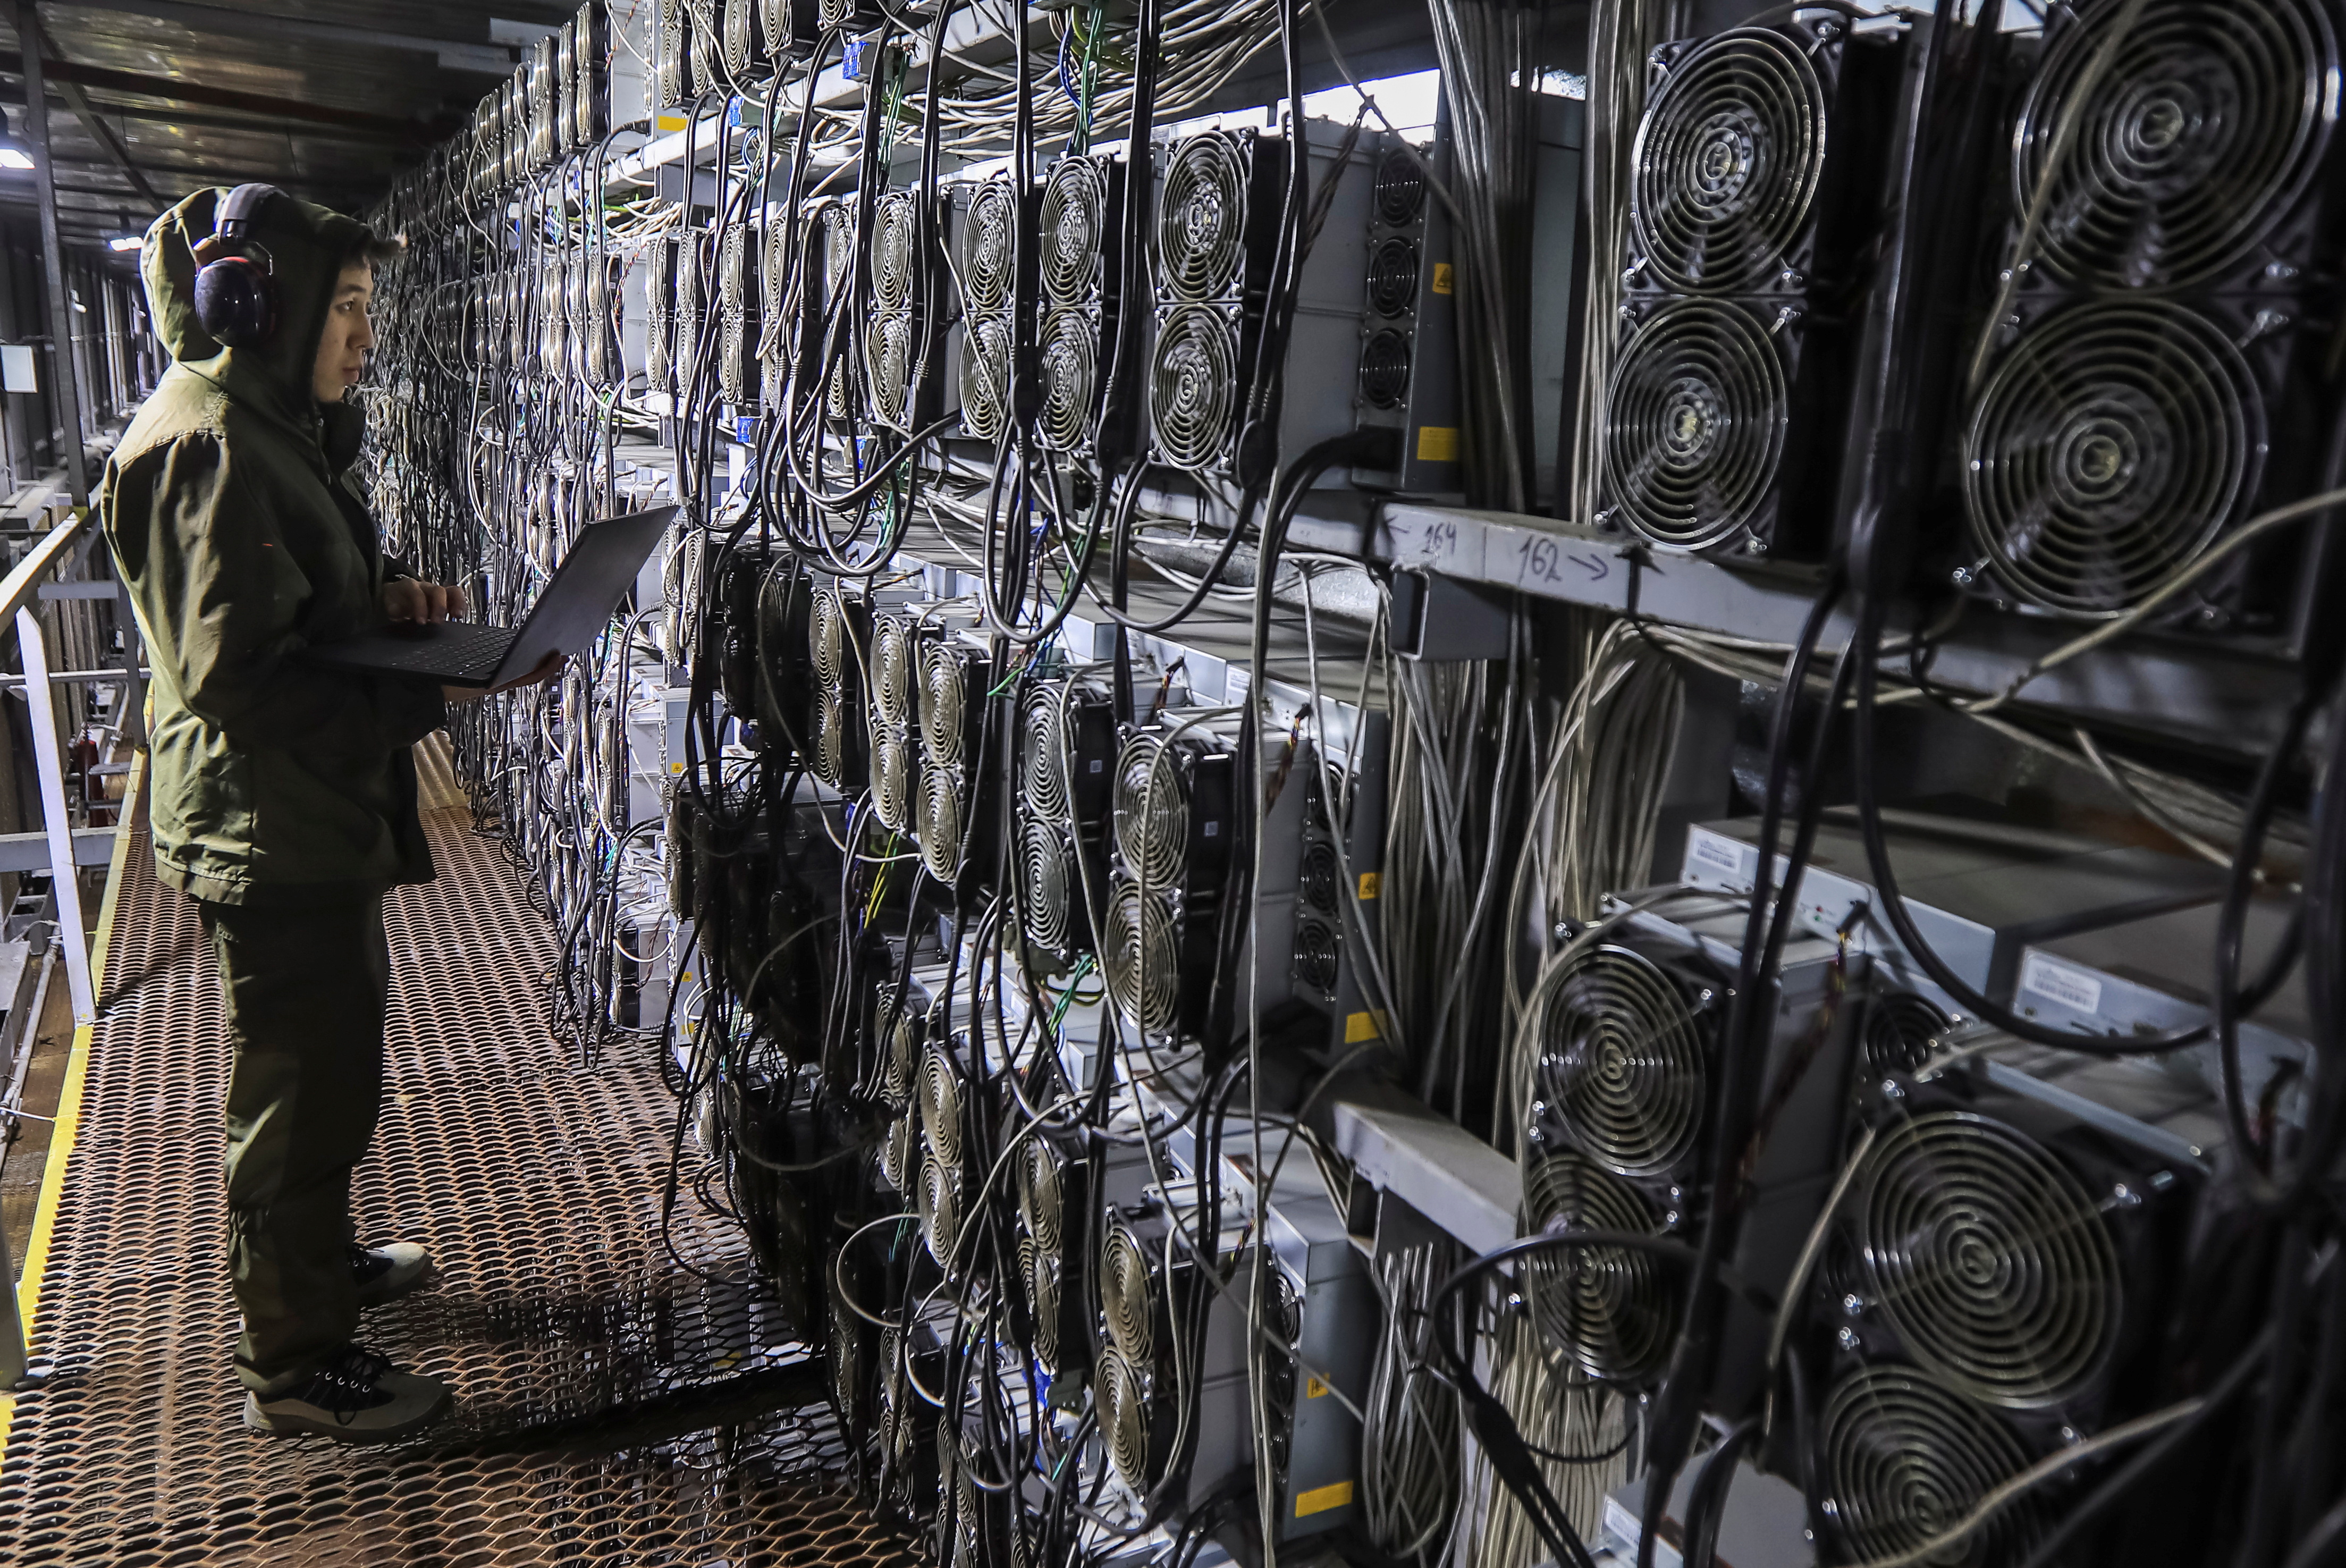 Bitcoin Mining - Overview, Benefits, and Requirements